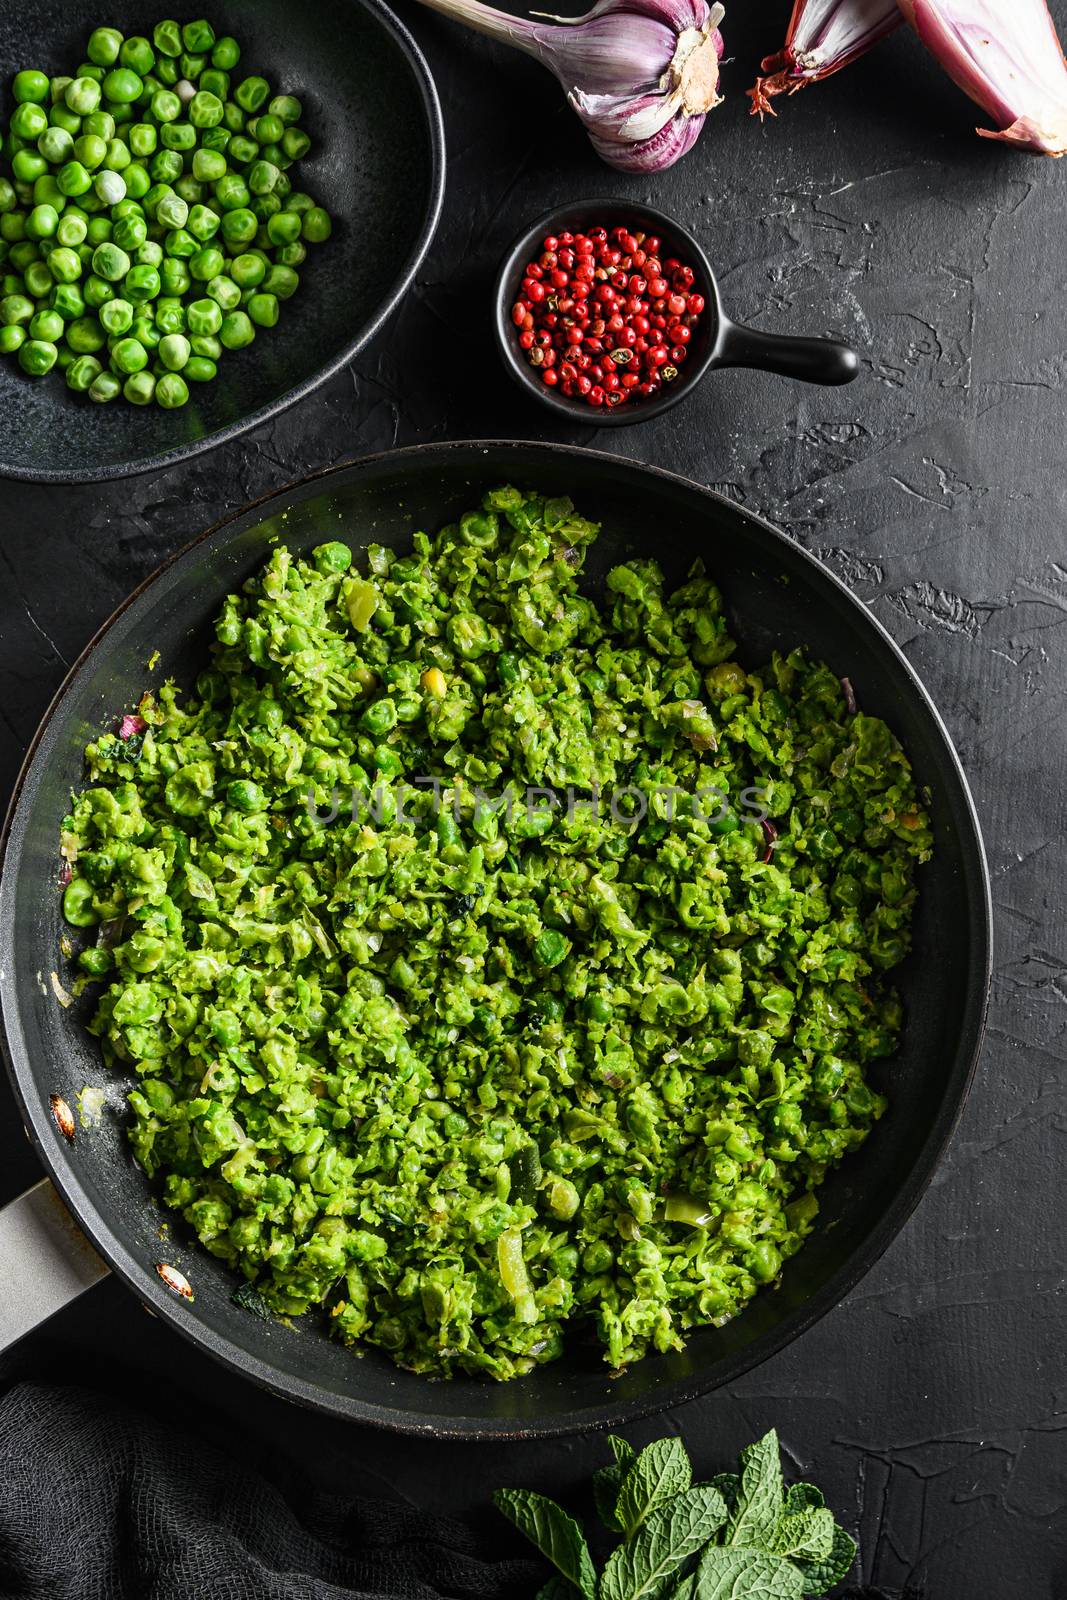 Mushy peas recipe cooked frying pan and peas in bowl with mint shallot pepper and salt on black stone surface organic keto food top view close up.